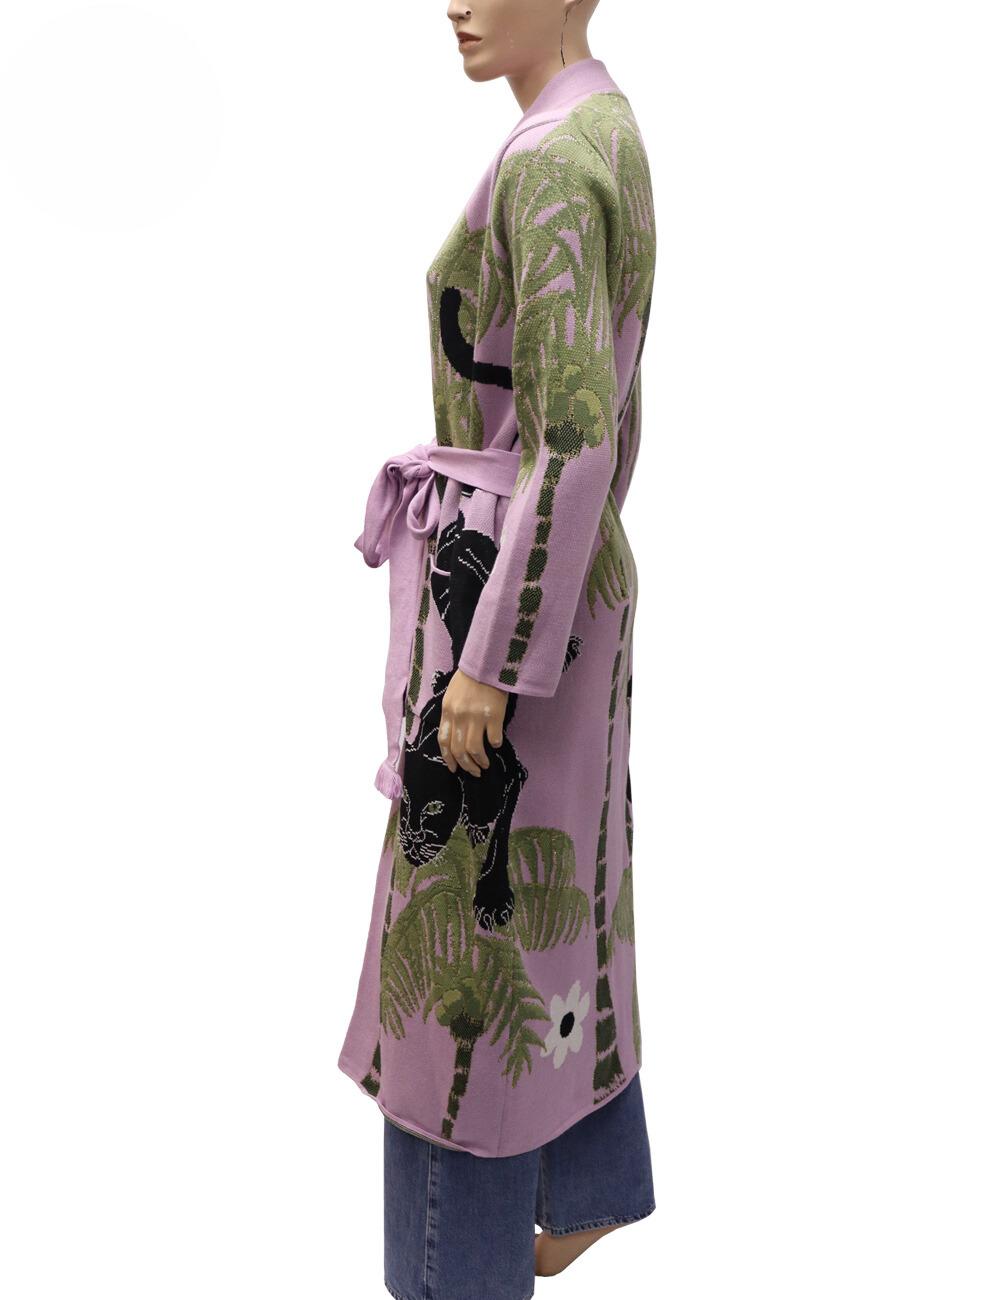 Hayley Menzies Prowling Panther Cotton Jacquard Duster Lilac Cardigan, Features Straight cut body, Maxi Length, Sleeves with shallow front band, and a Belt. 

Material:  95% cotton, 5% Metallic Fibre
Size: EU 38 /  M 
Bust: 123cm
Waist: 121cm
Hip: